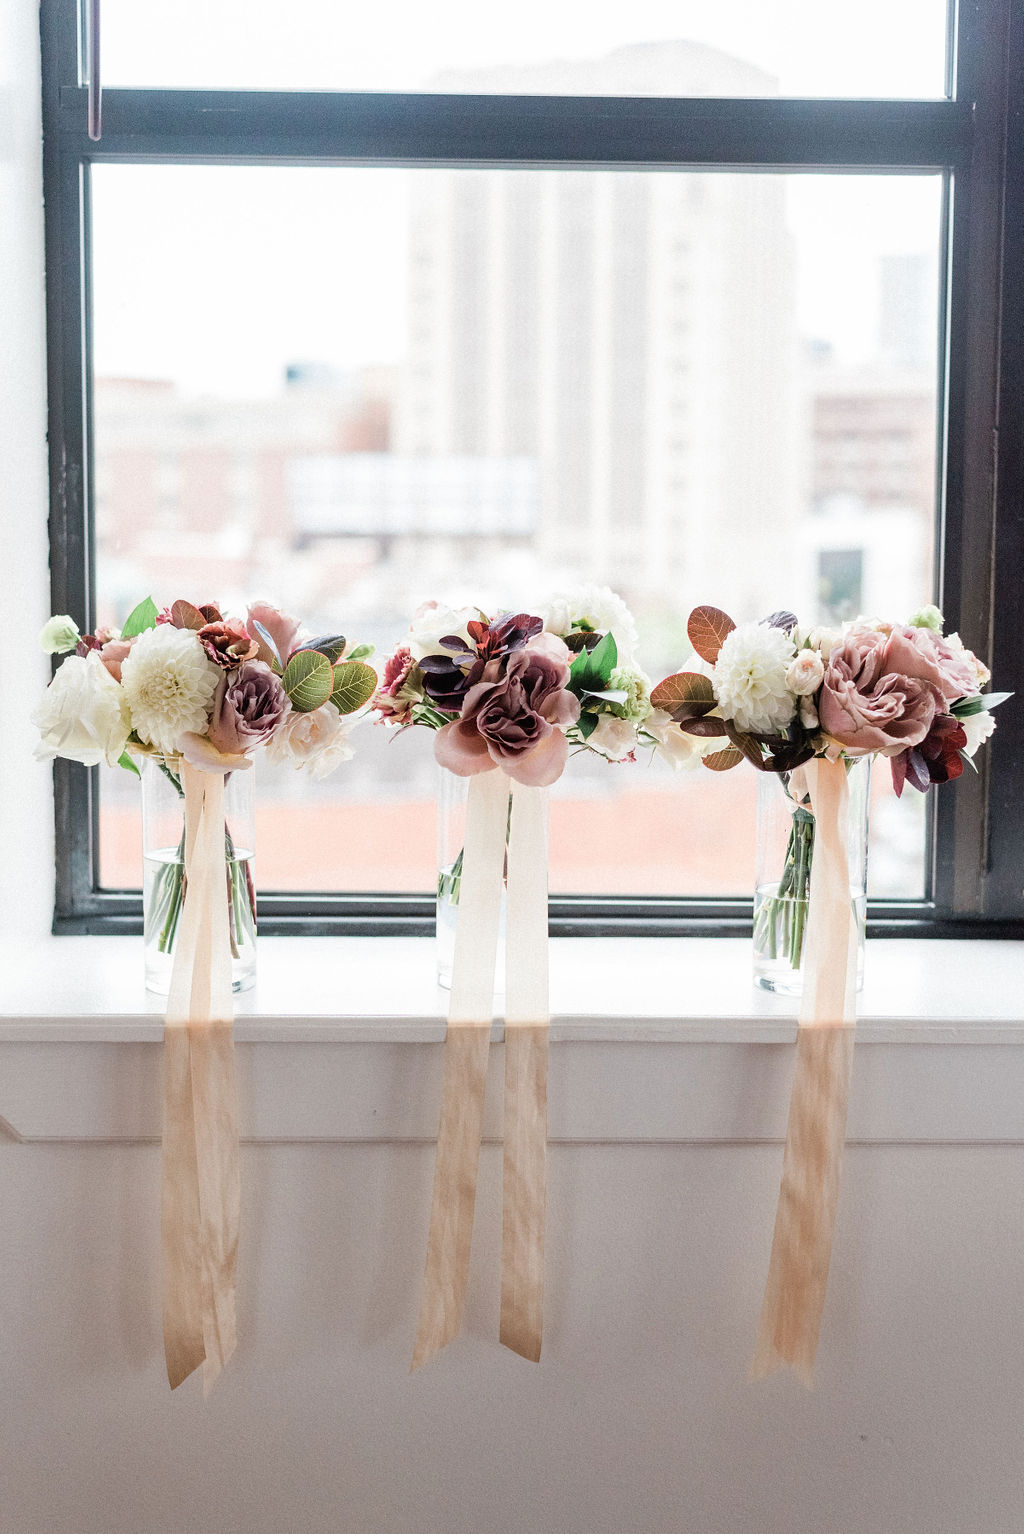 Bouquets sitting on a ledge